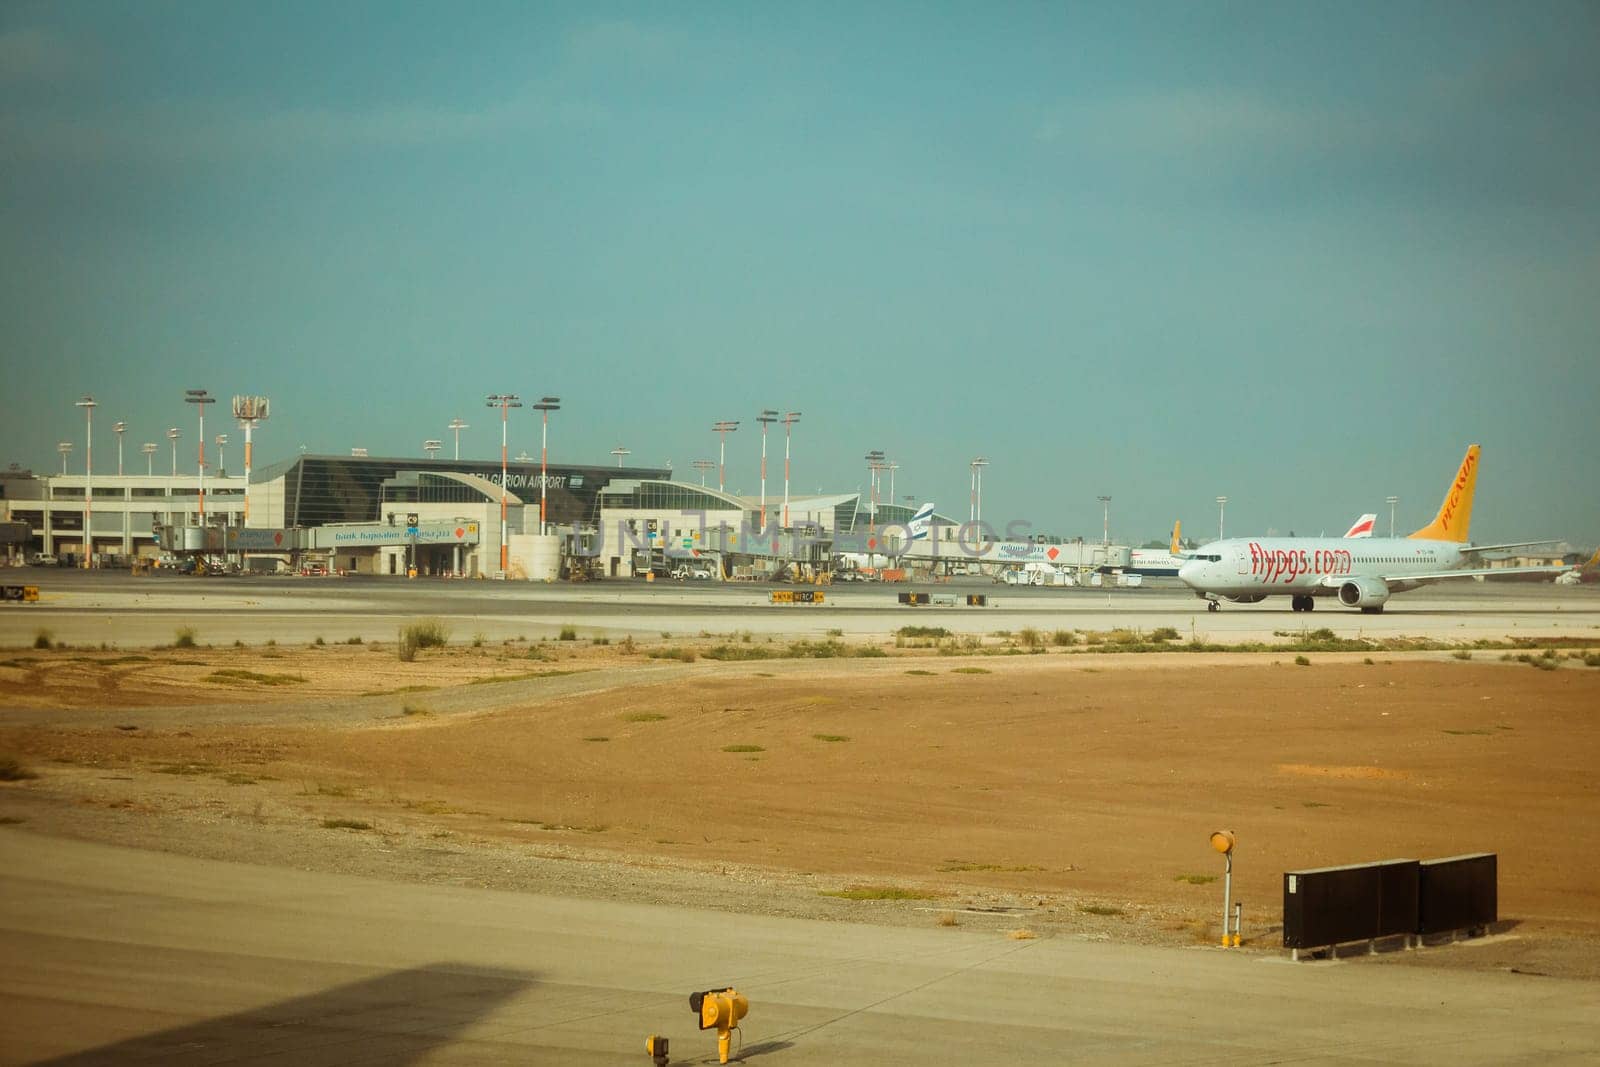 Tel Aviv, Israel - Sep 15, 2015: Flypgs airline commercial plane on the runway and terminal 3 at Ben Gurion International Airport.